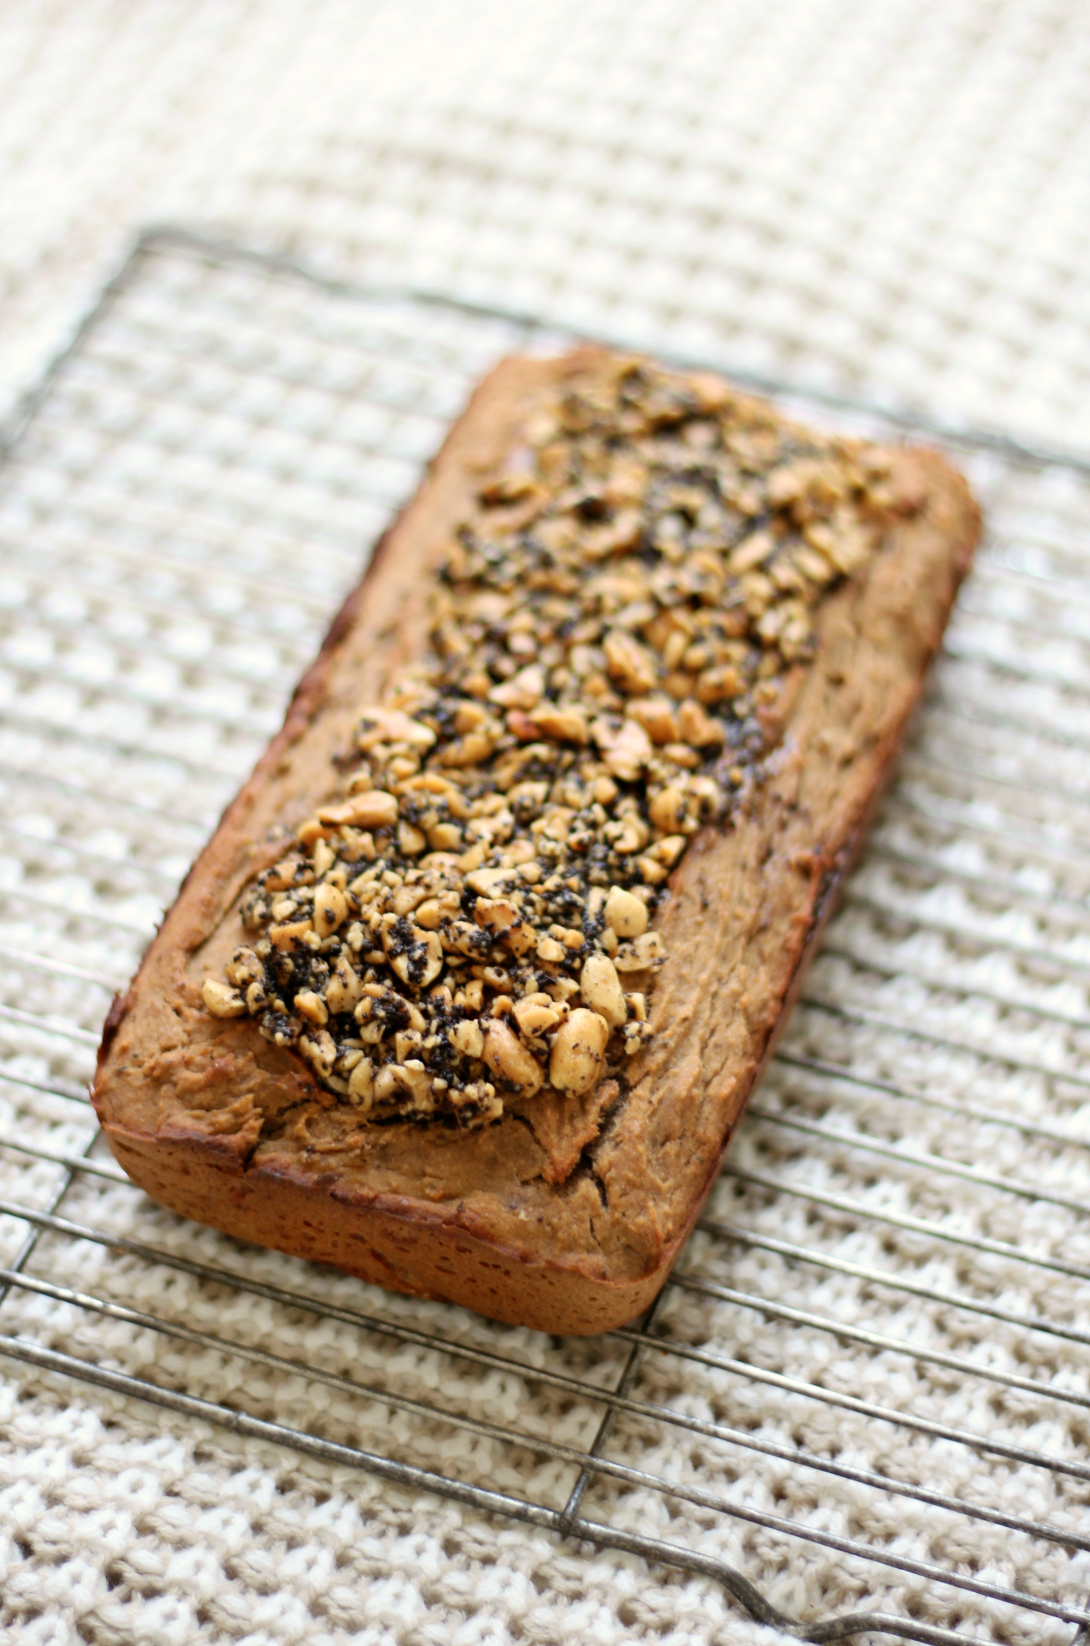 Peanut Butter Espresso Banana Bread | Strength and Sunshine @RebeccaGF666 More than just banana bread. A peanut butter espresso banana bread, moist, soft, secretly nutritious, gluten-free, and vegan. A subtly sweet, buttery, quick bread to make the perfect healthy breakfast, snack, or dessert recipe!